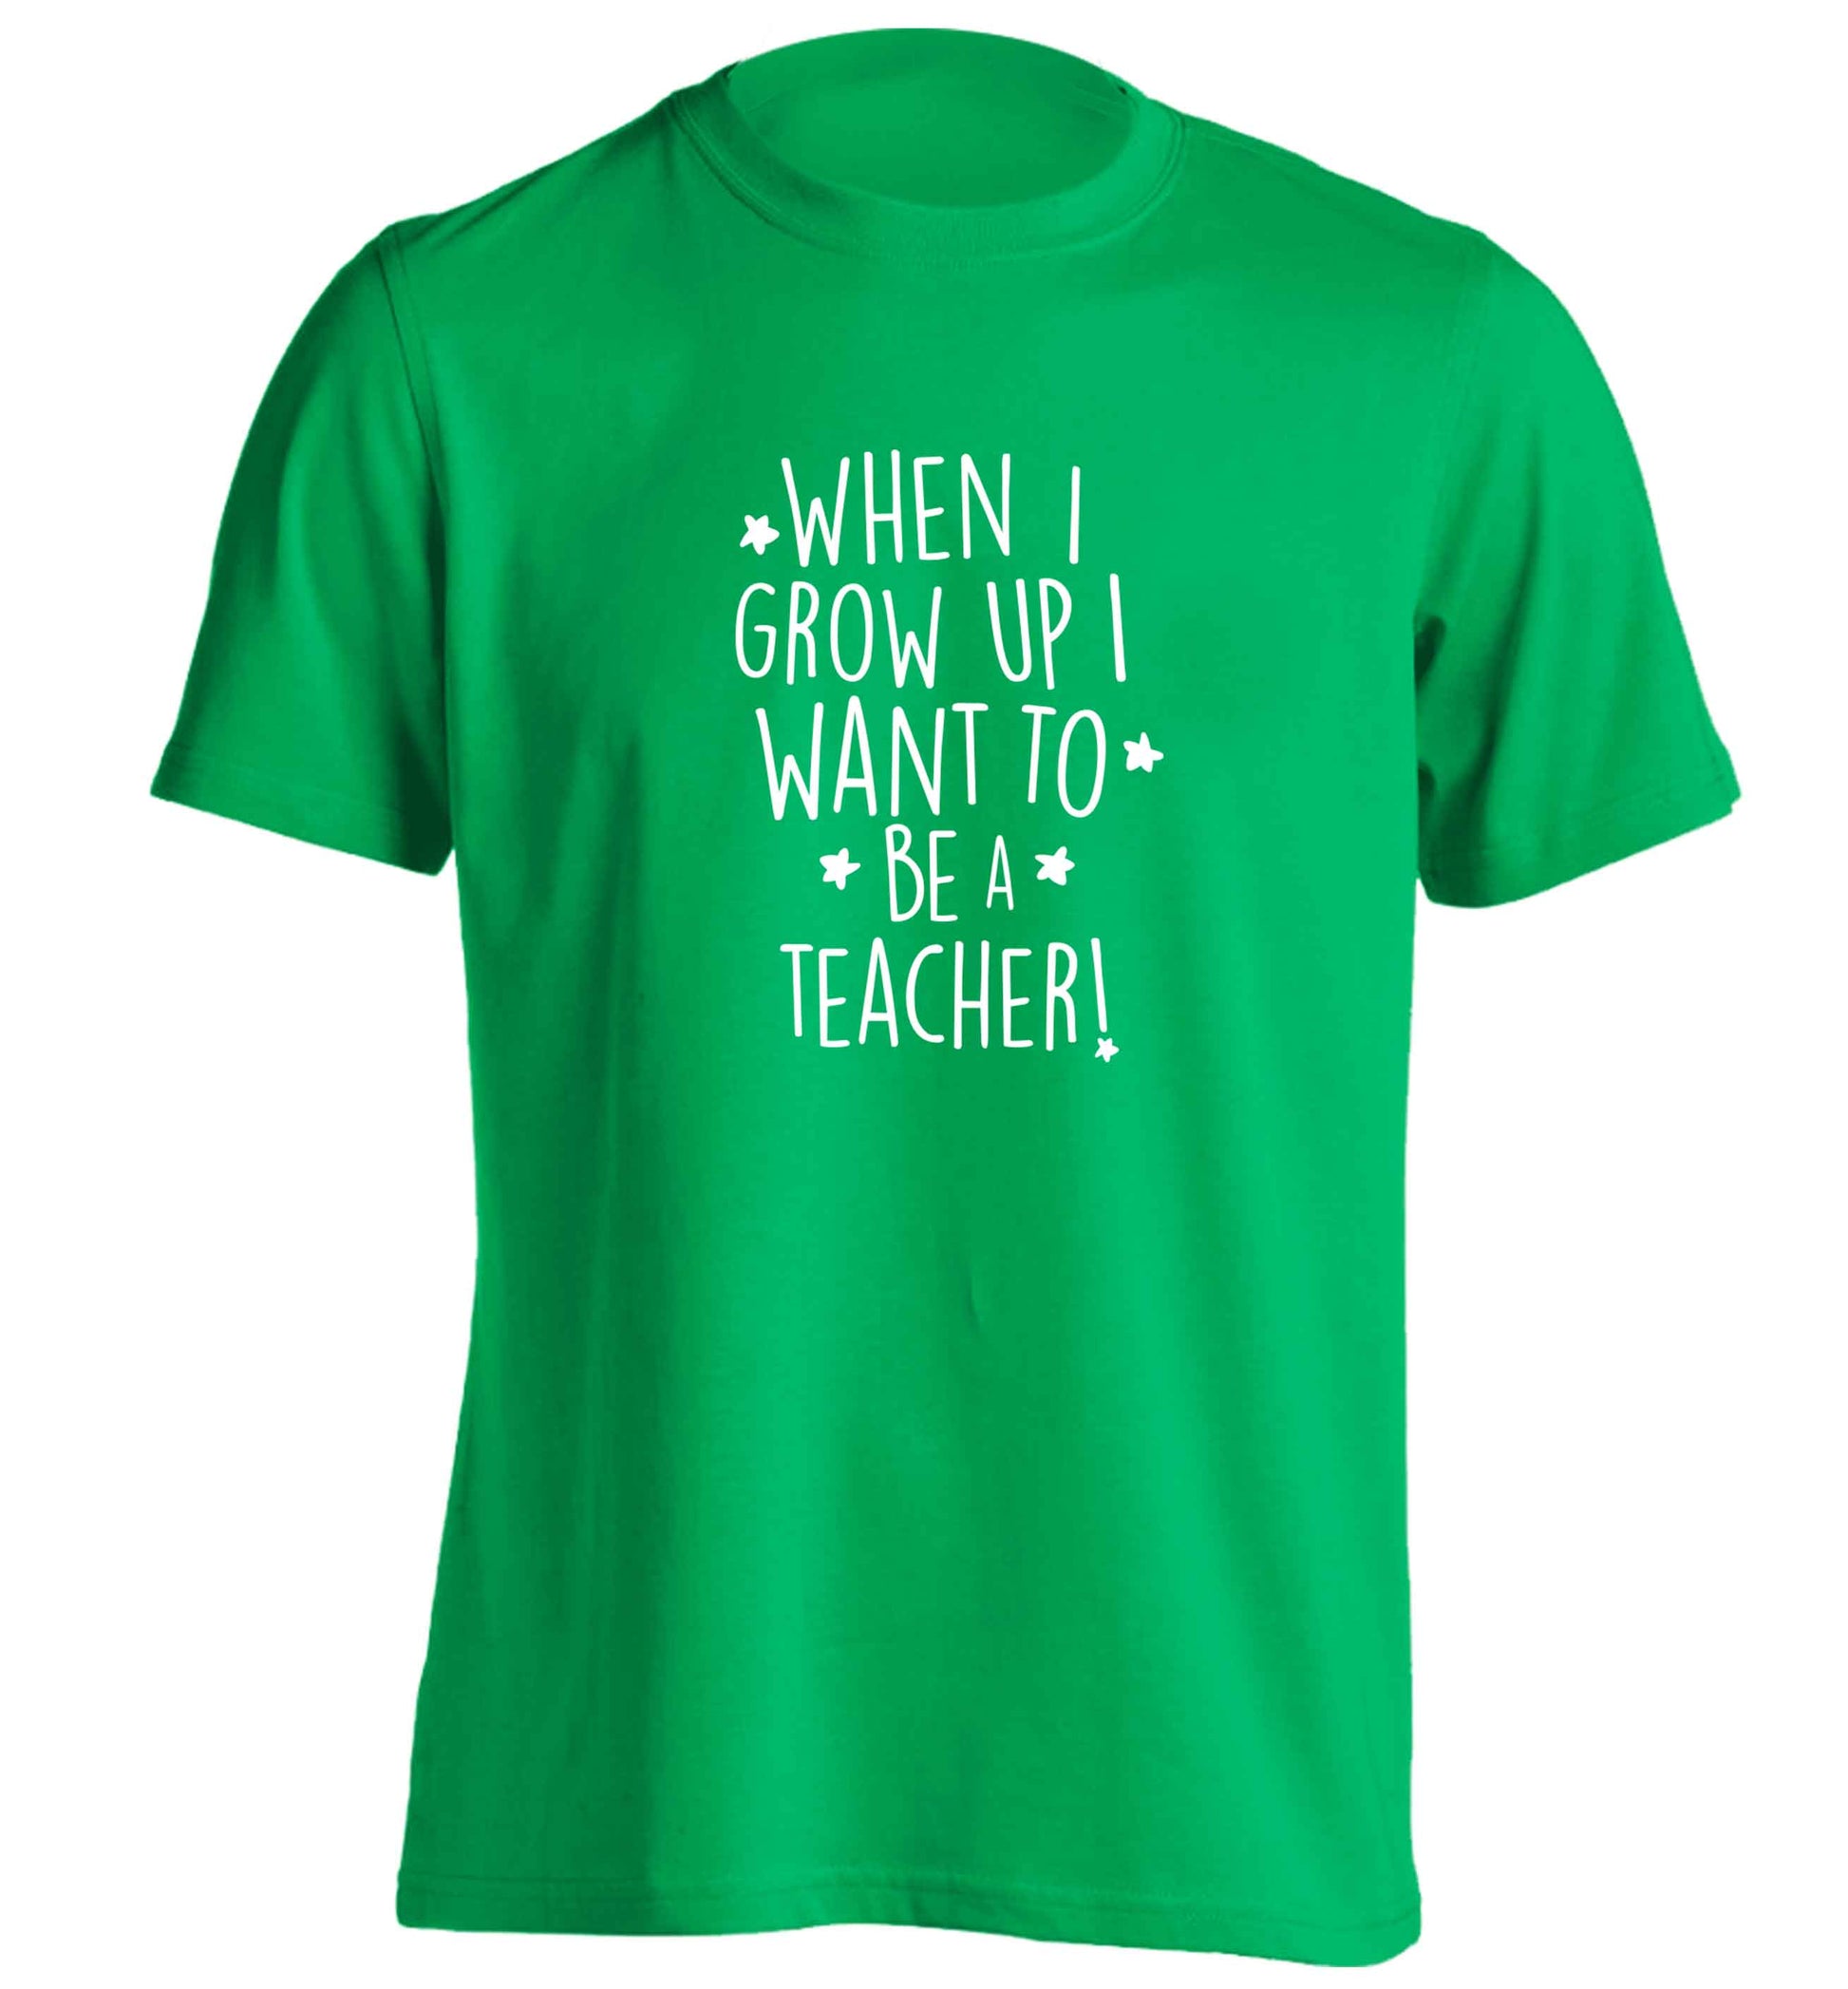 When I grow up I want to be a teacher adults unisex green Tshirt 2XL